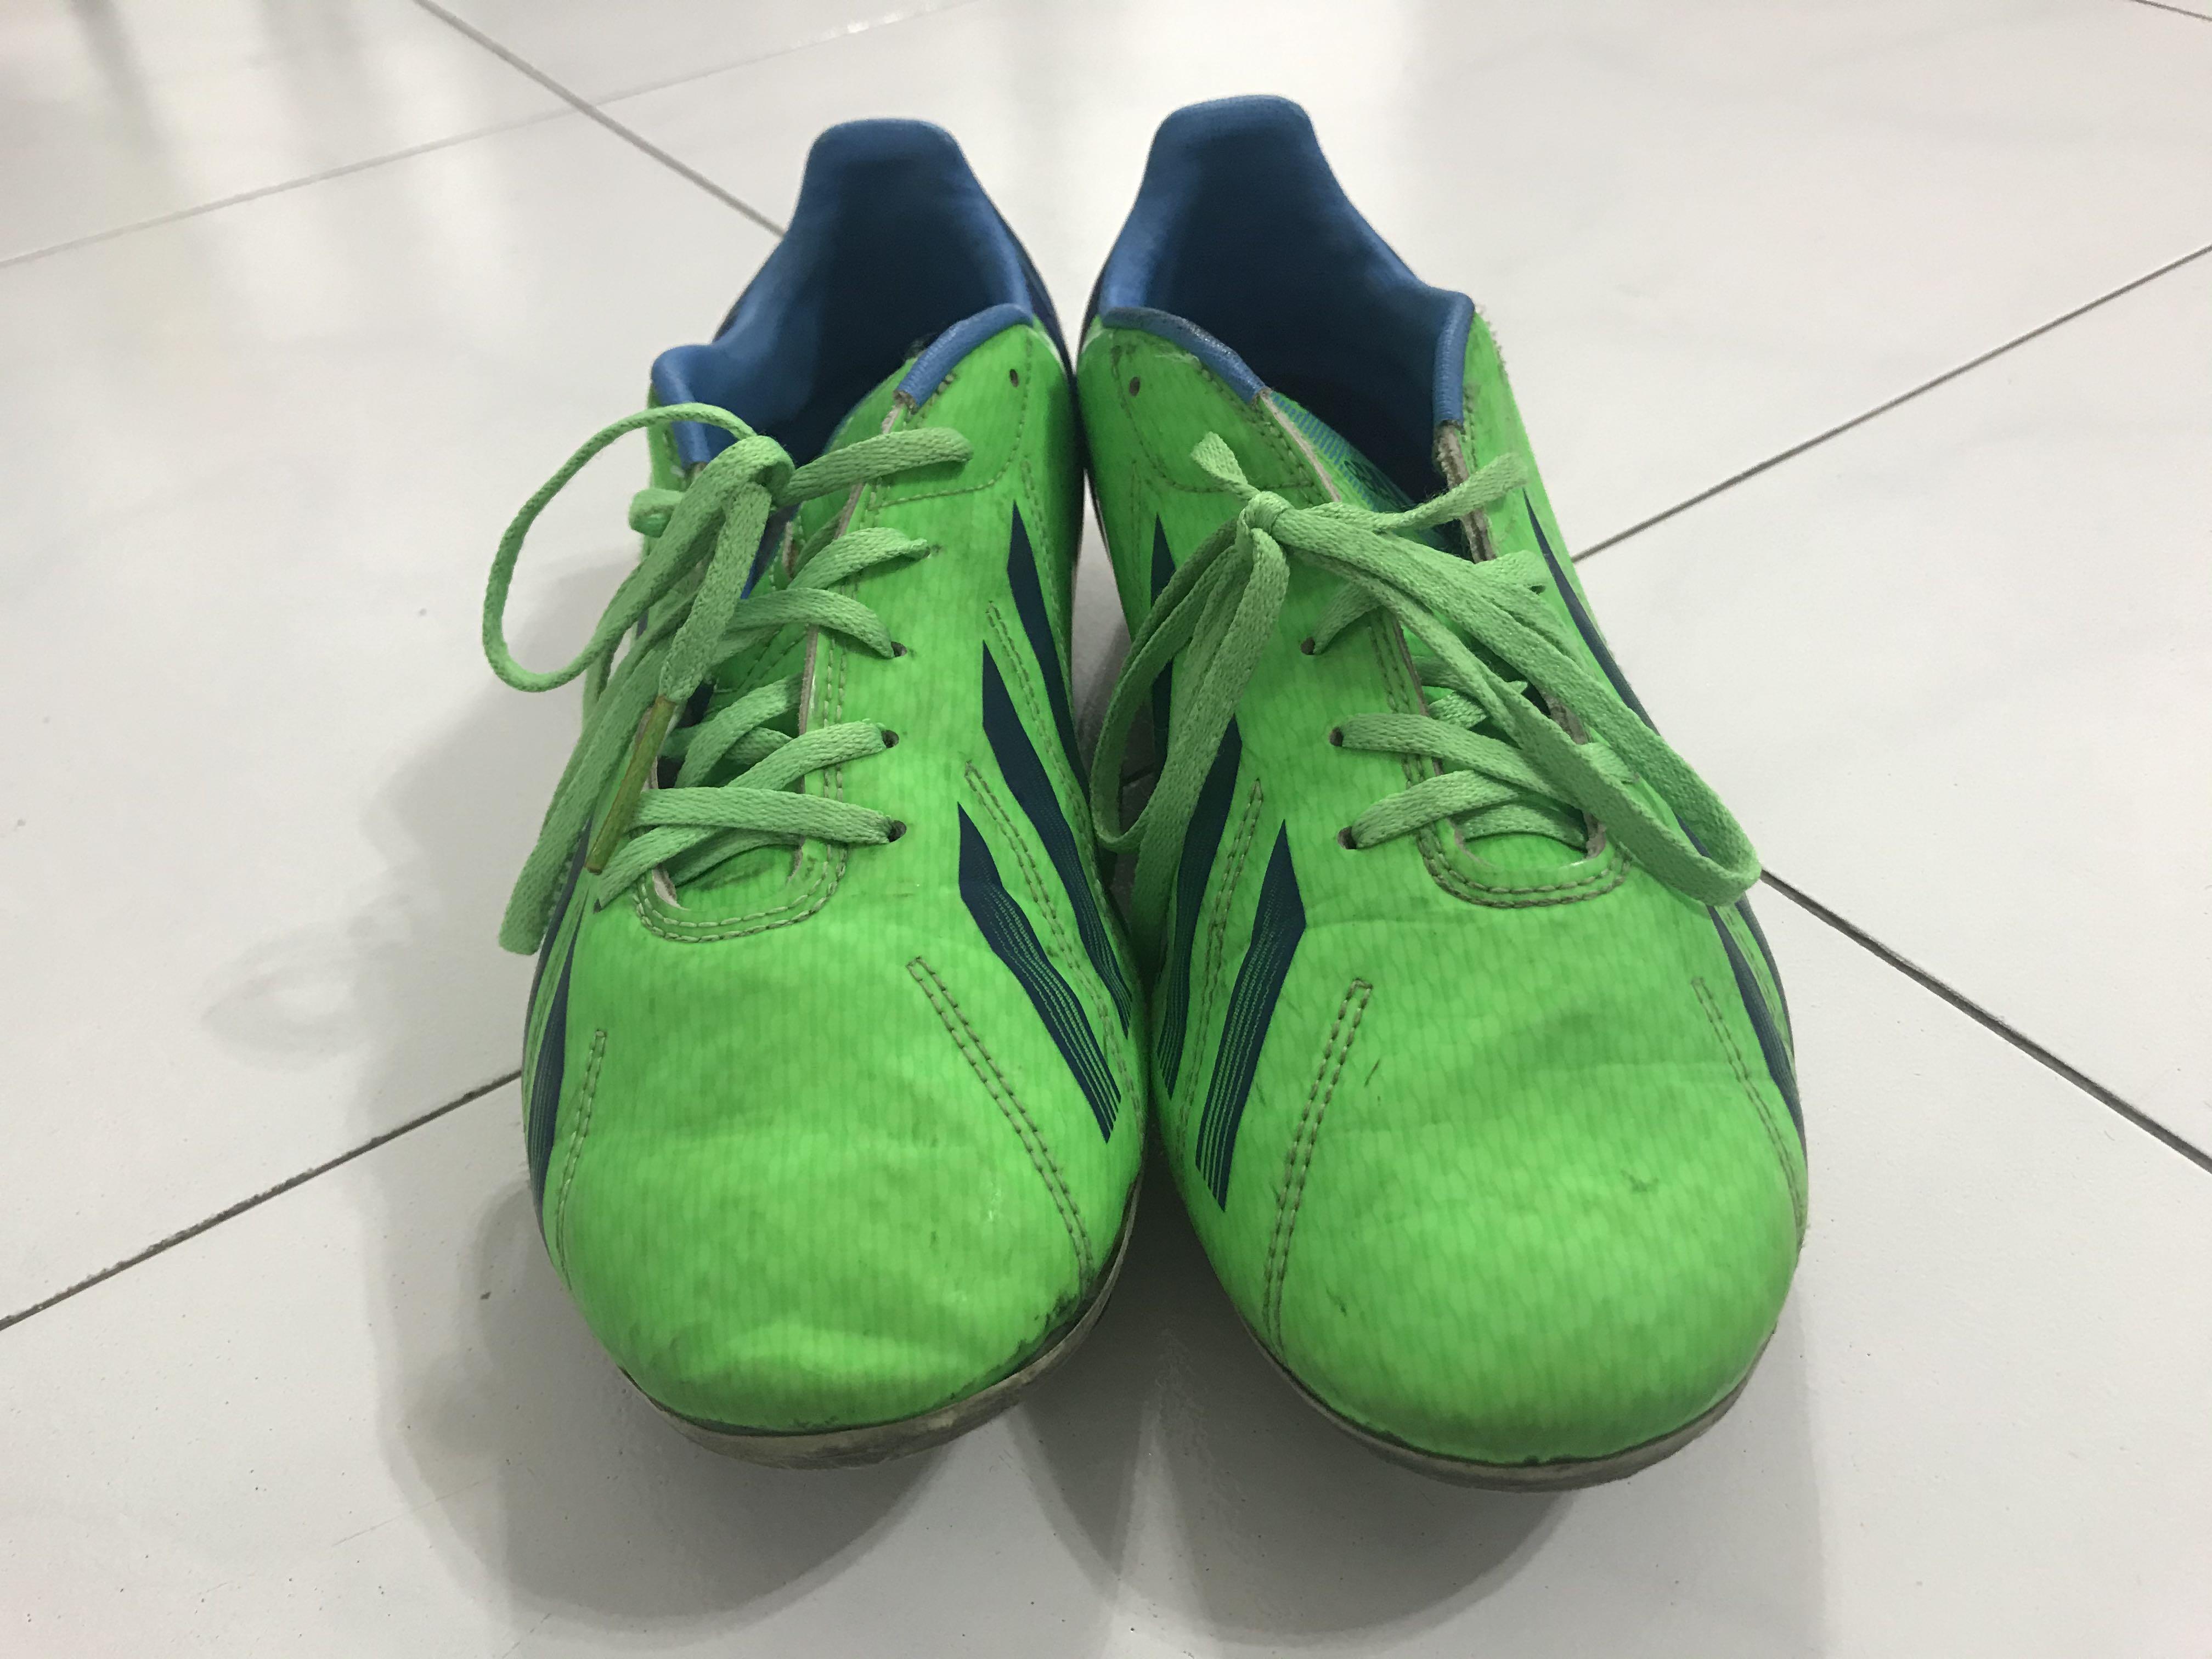 used soccer shoes